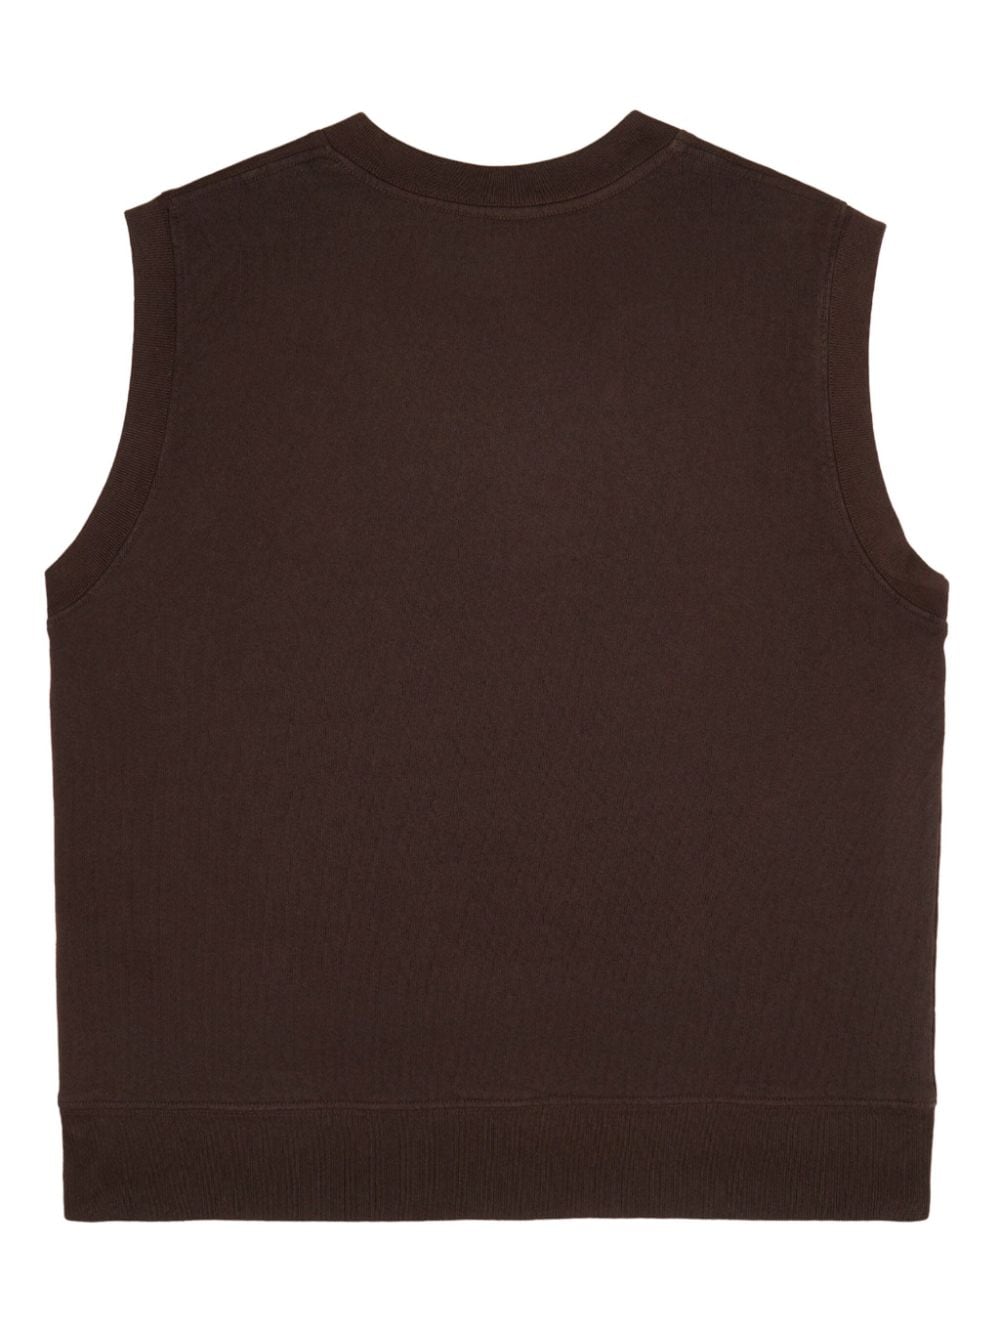 Sporty & Rich Syracuse embroidered cotton vest - Bruin